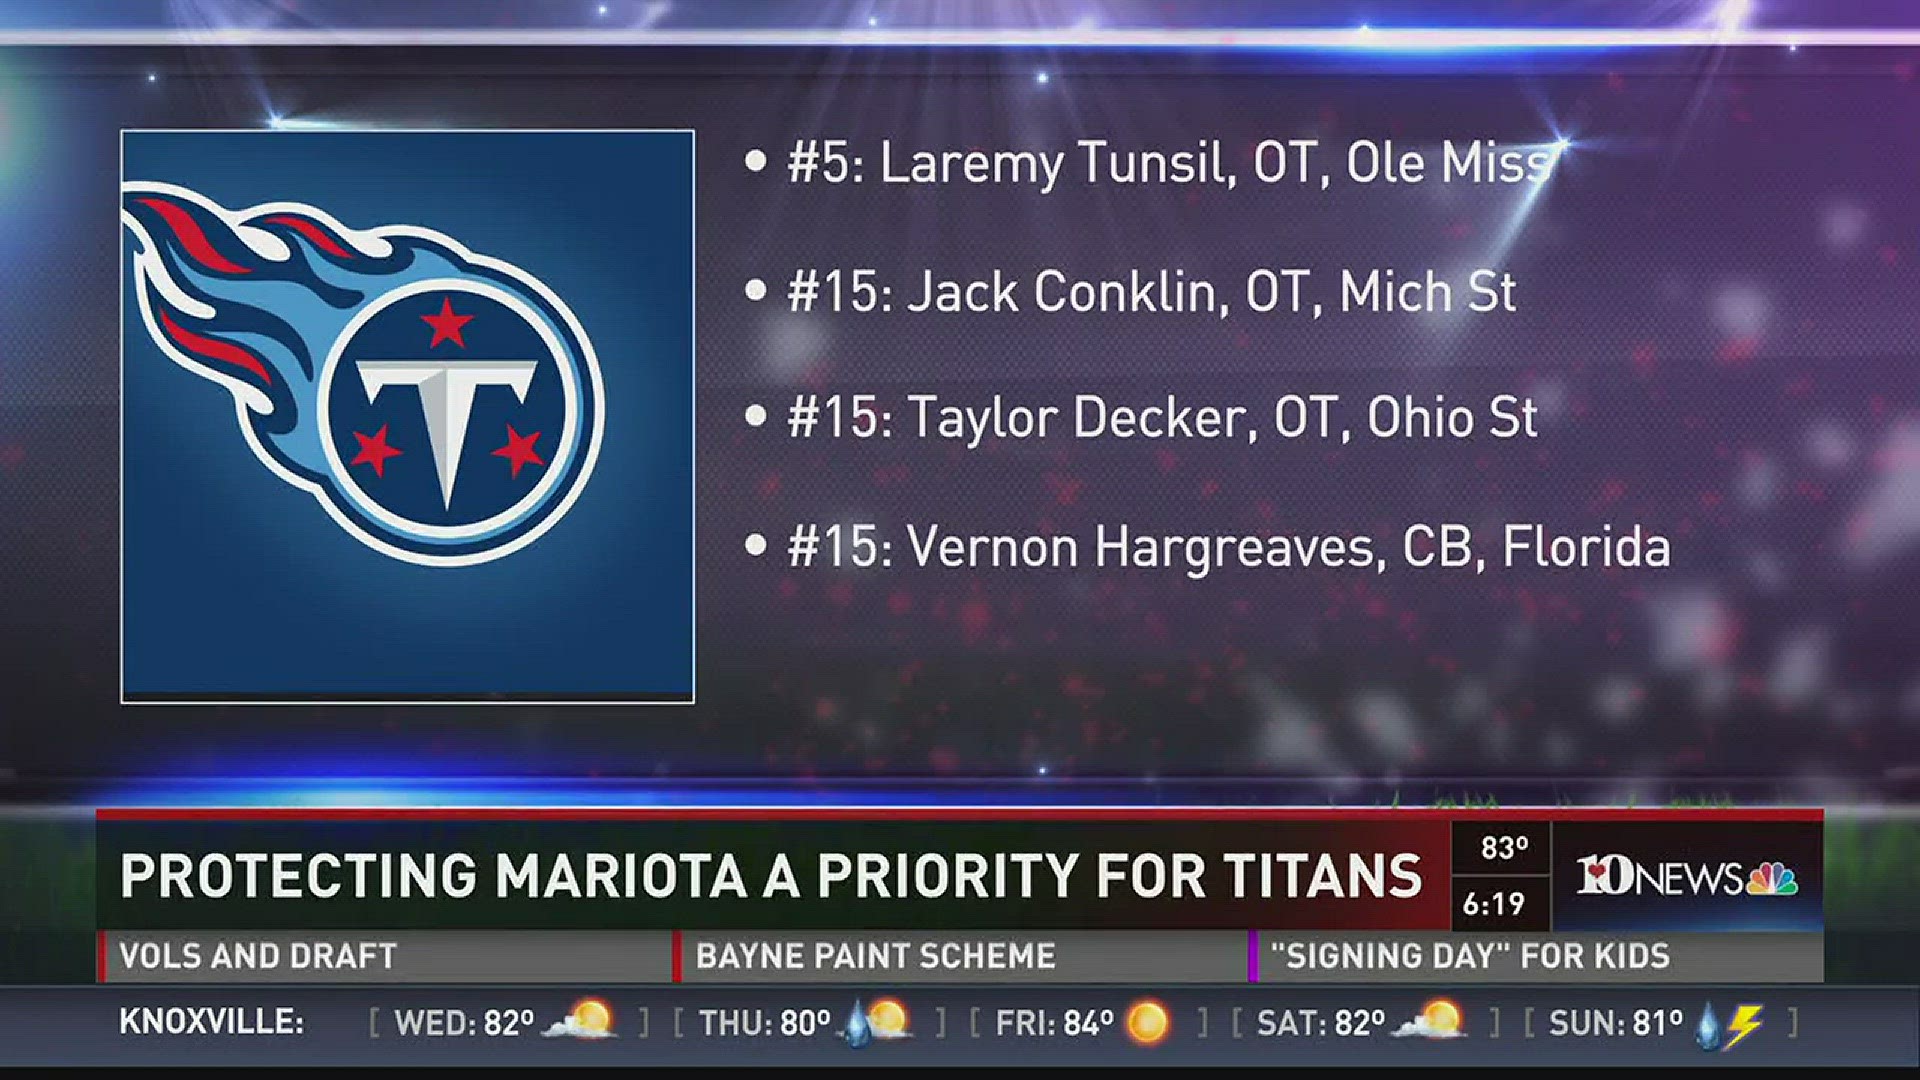 What will Titans do in 1st round?